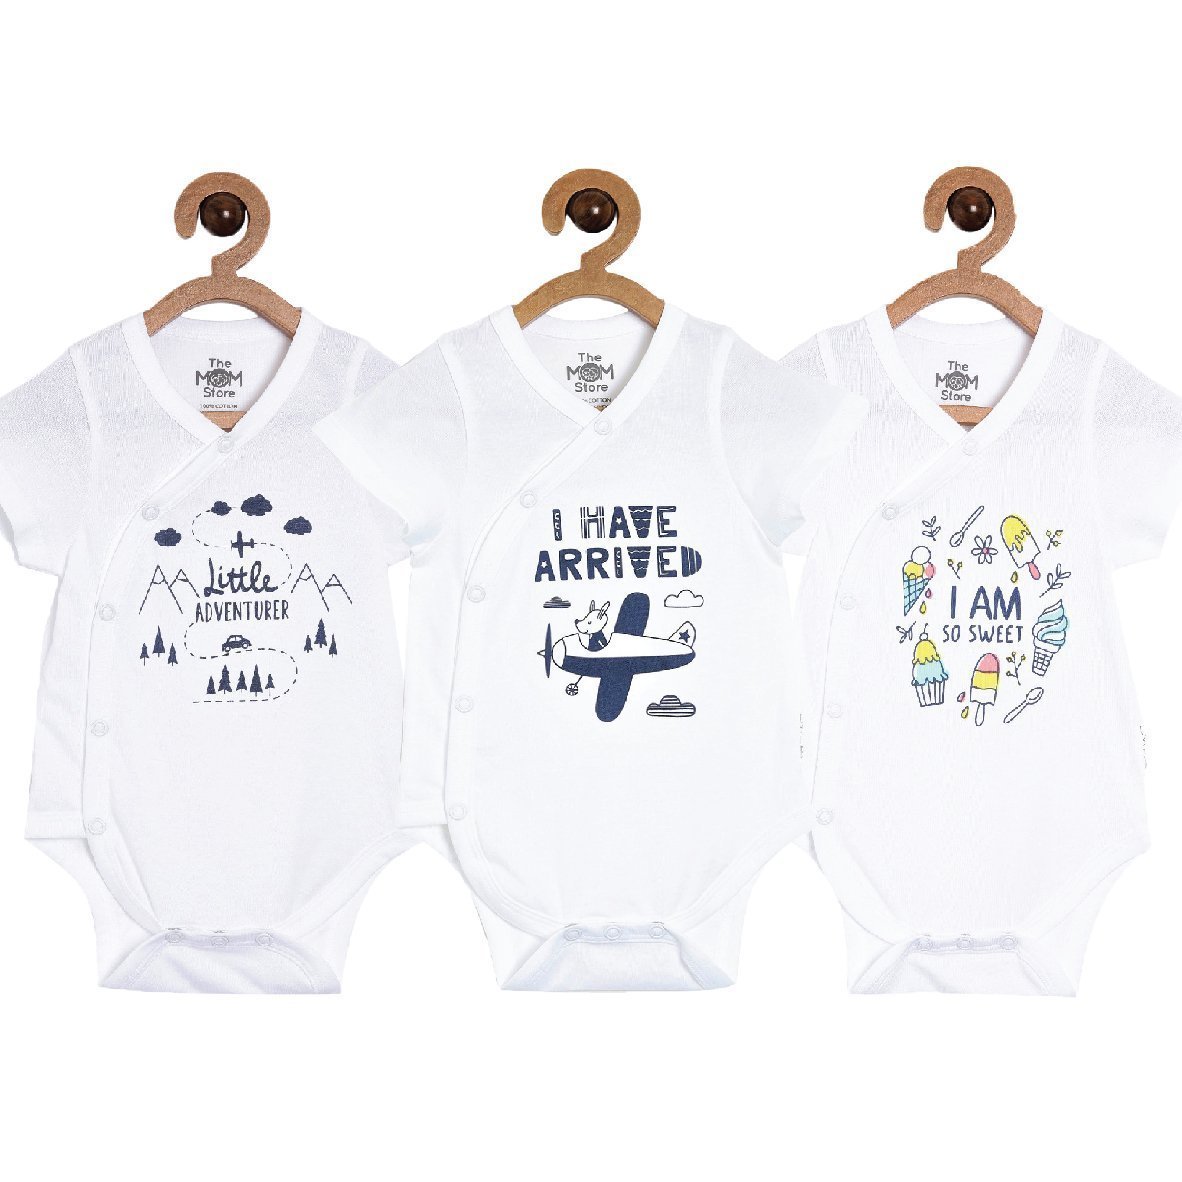 Combo of 3 Baby Onesies - Option E - ONC-3LVAVSW-PM